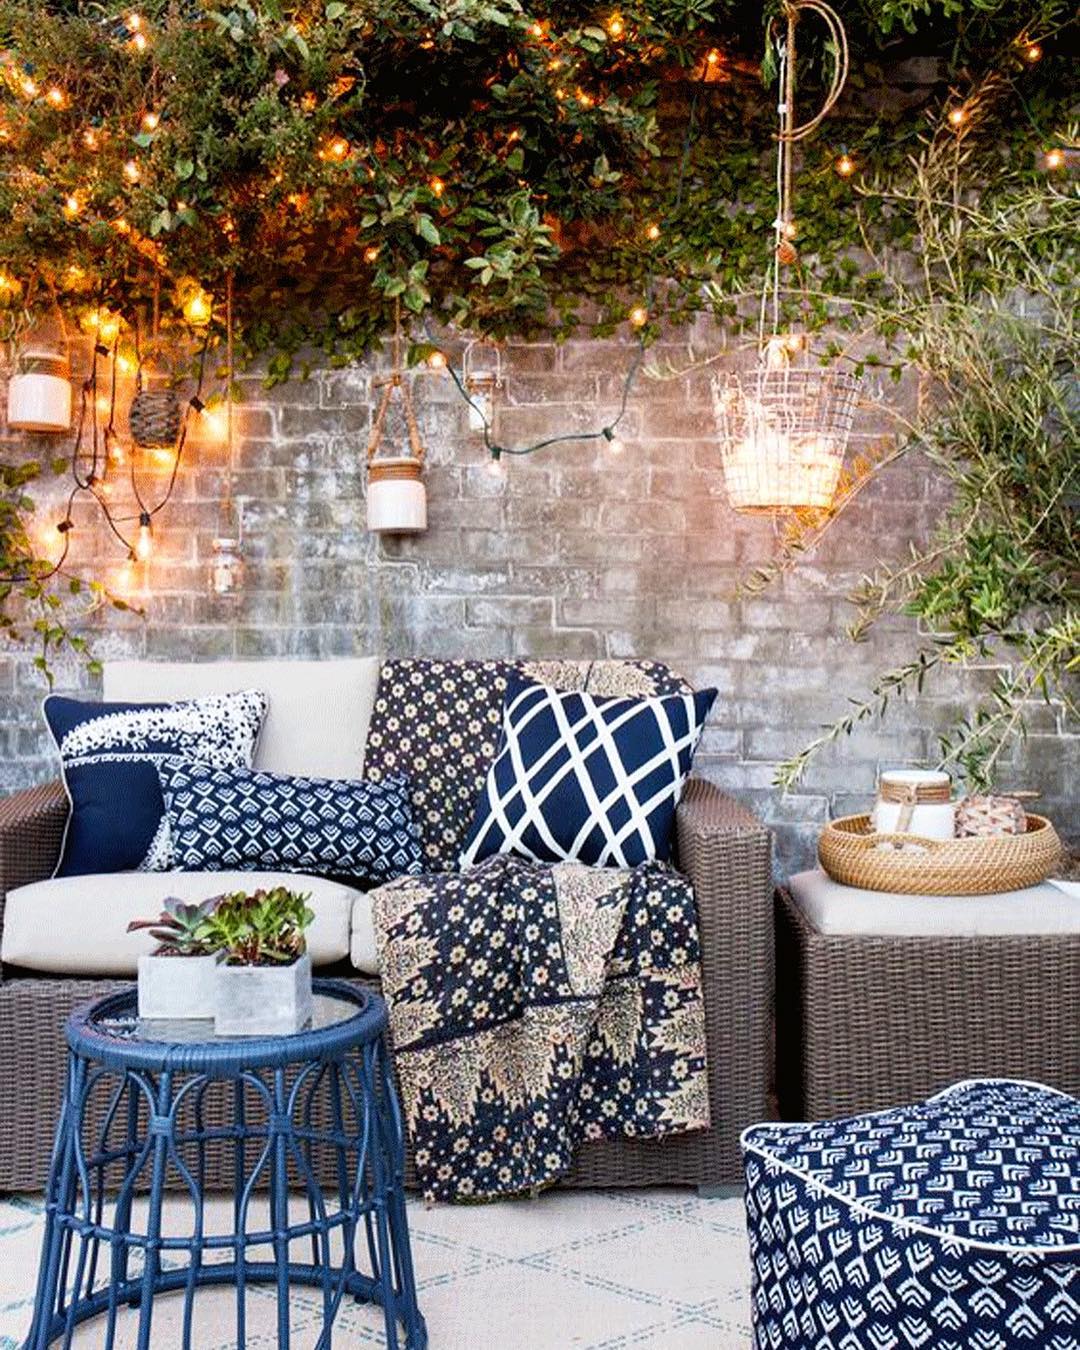 Spring is here again, and for those of us on the West Coast at least, that means long, leisurely evenings on the patio with the right lighting. #stringlights #stringlighting